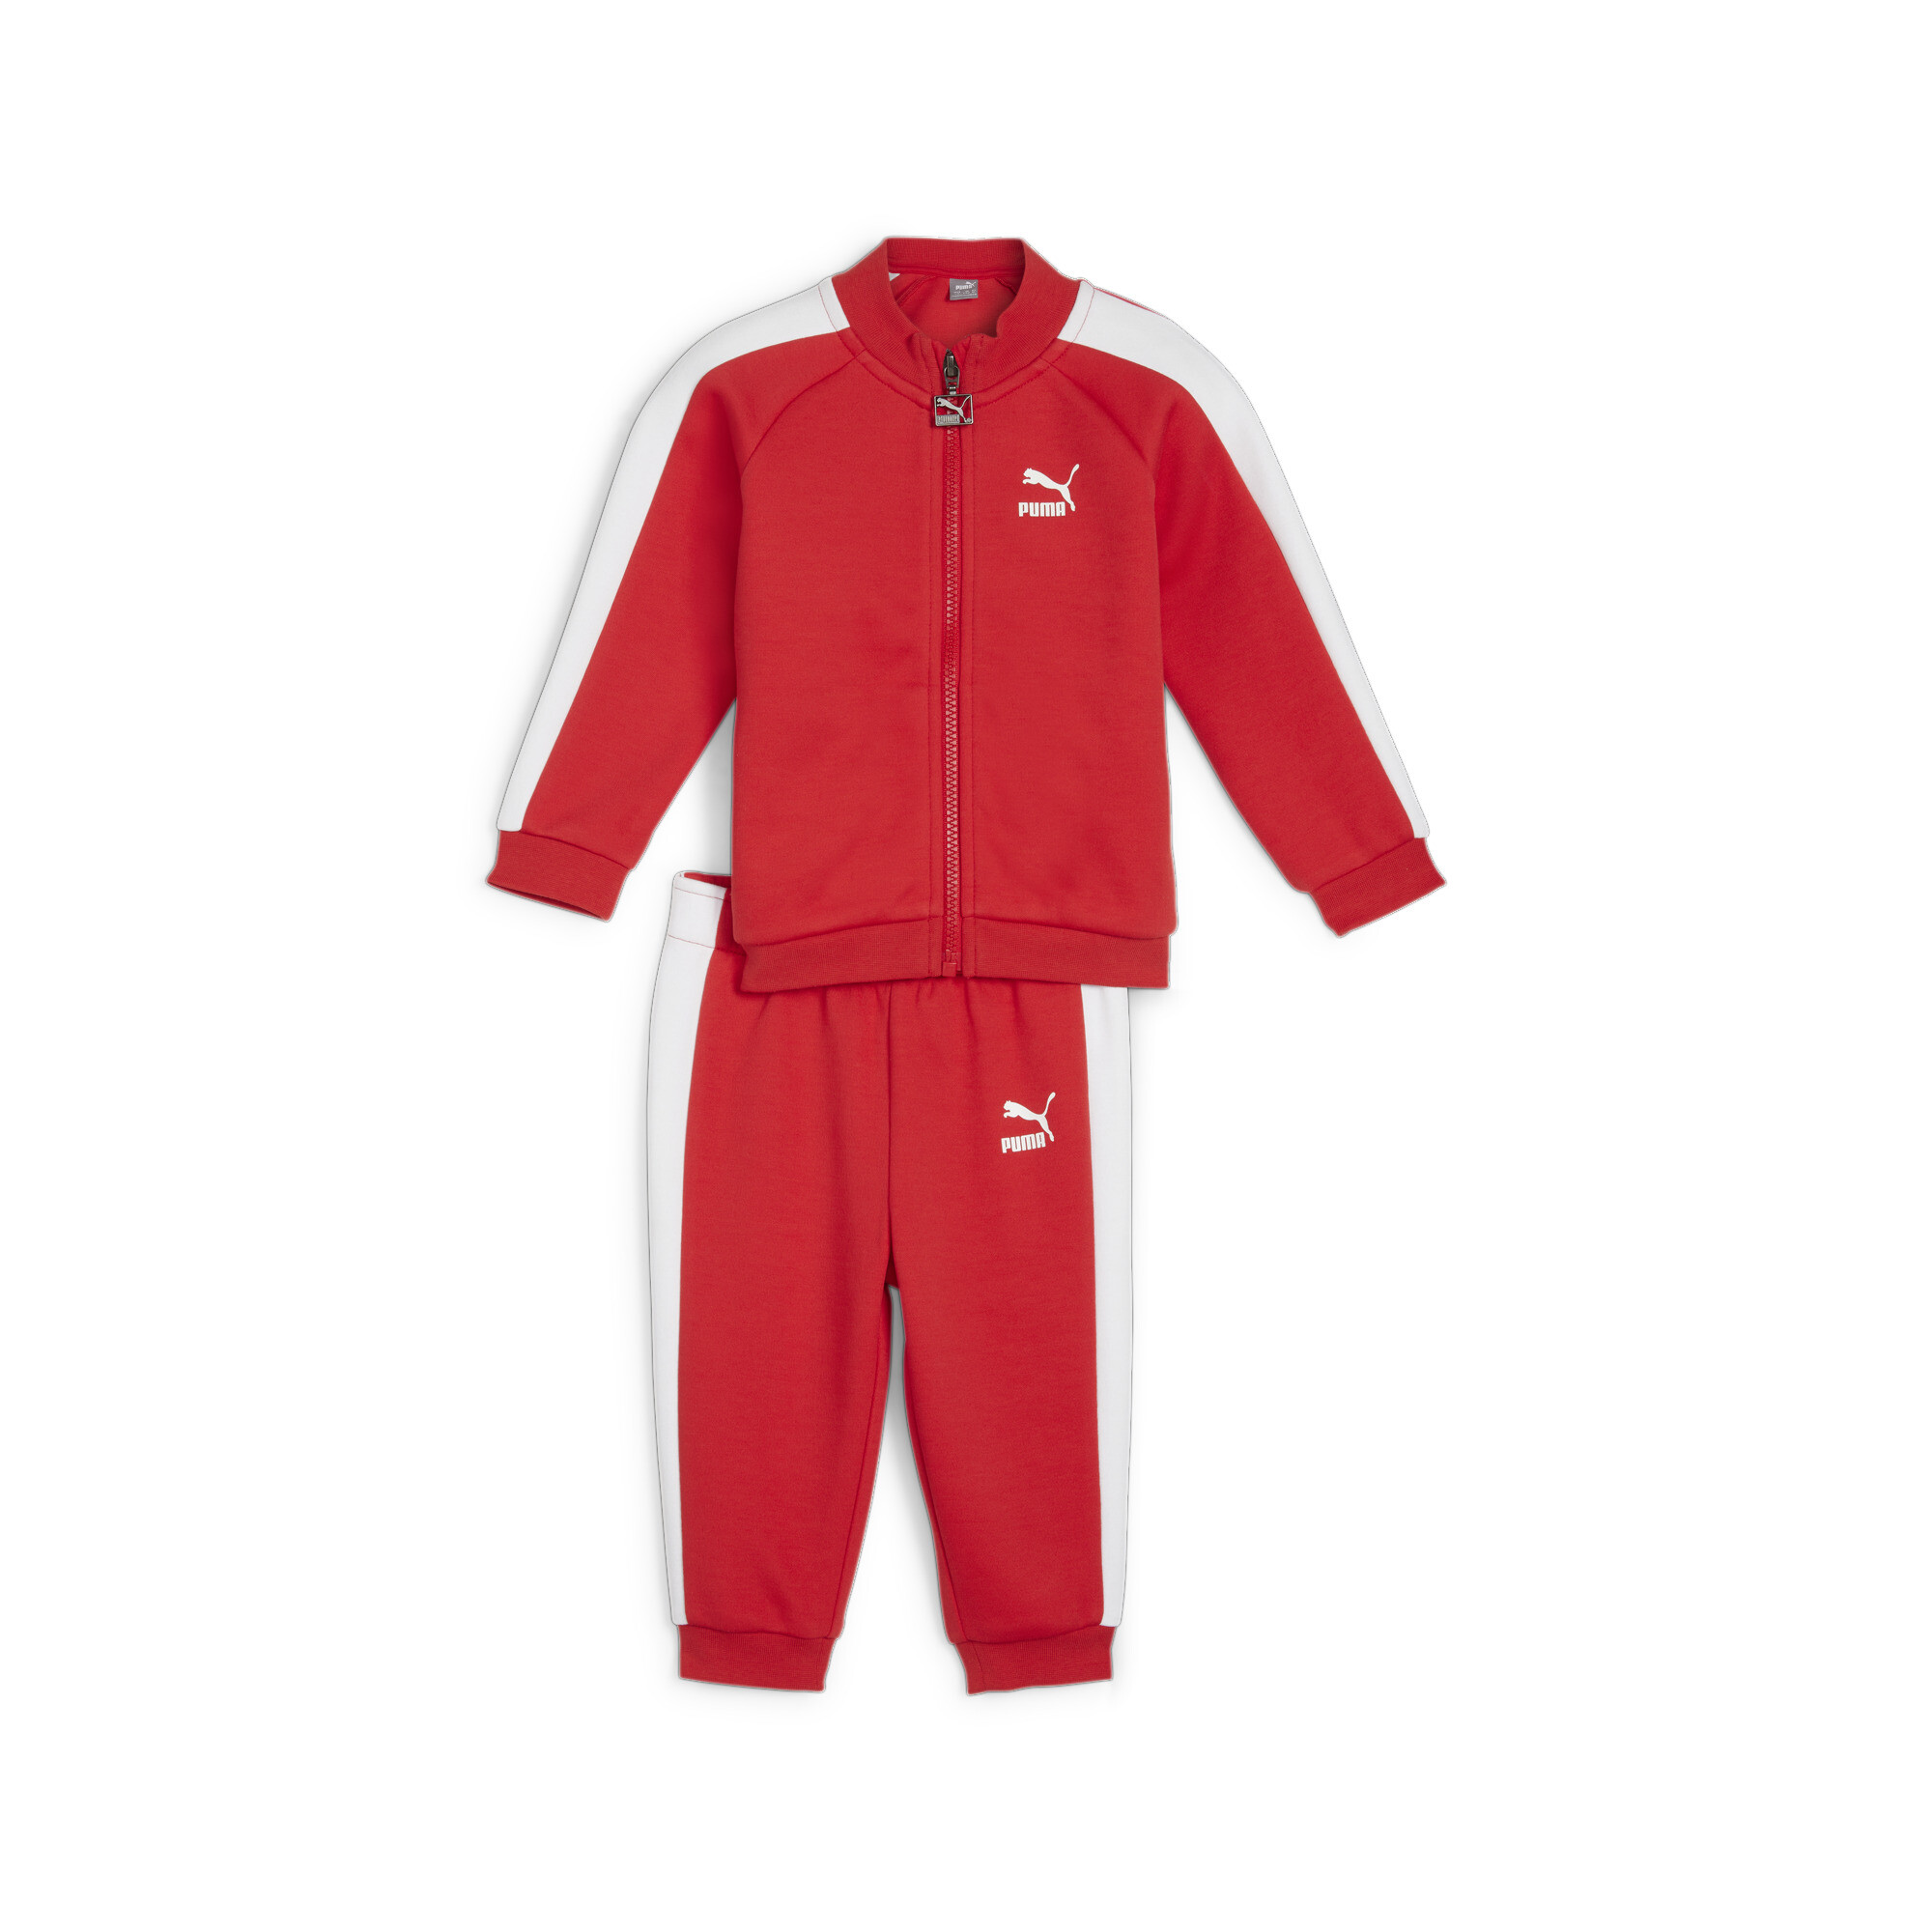 Puma MINICATS T7 ICONIC Baby Tracksuit Set, Red, Size 3-4Y, Clothing